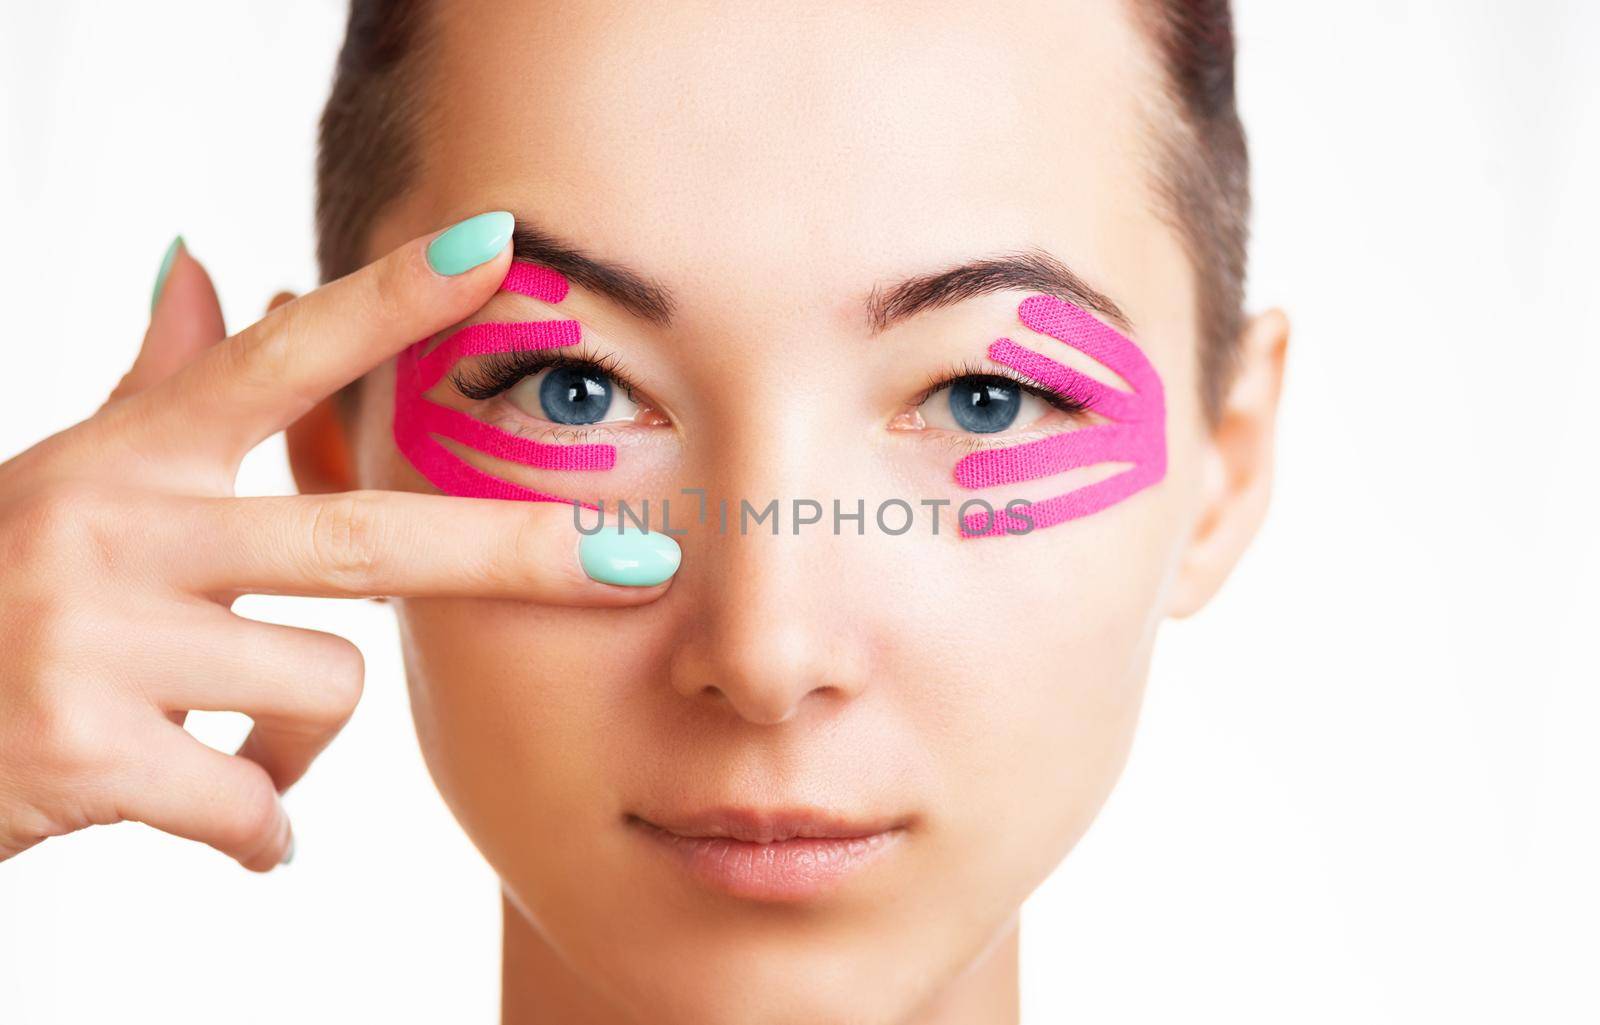 Front view portrait of smiling beautiful young woman with kinesiology tapes on eyelid against wrinkles, anti-aging beauty procedure.